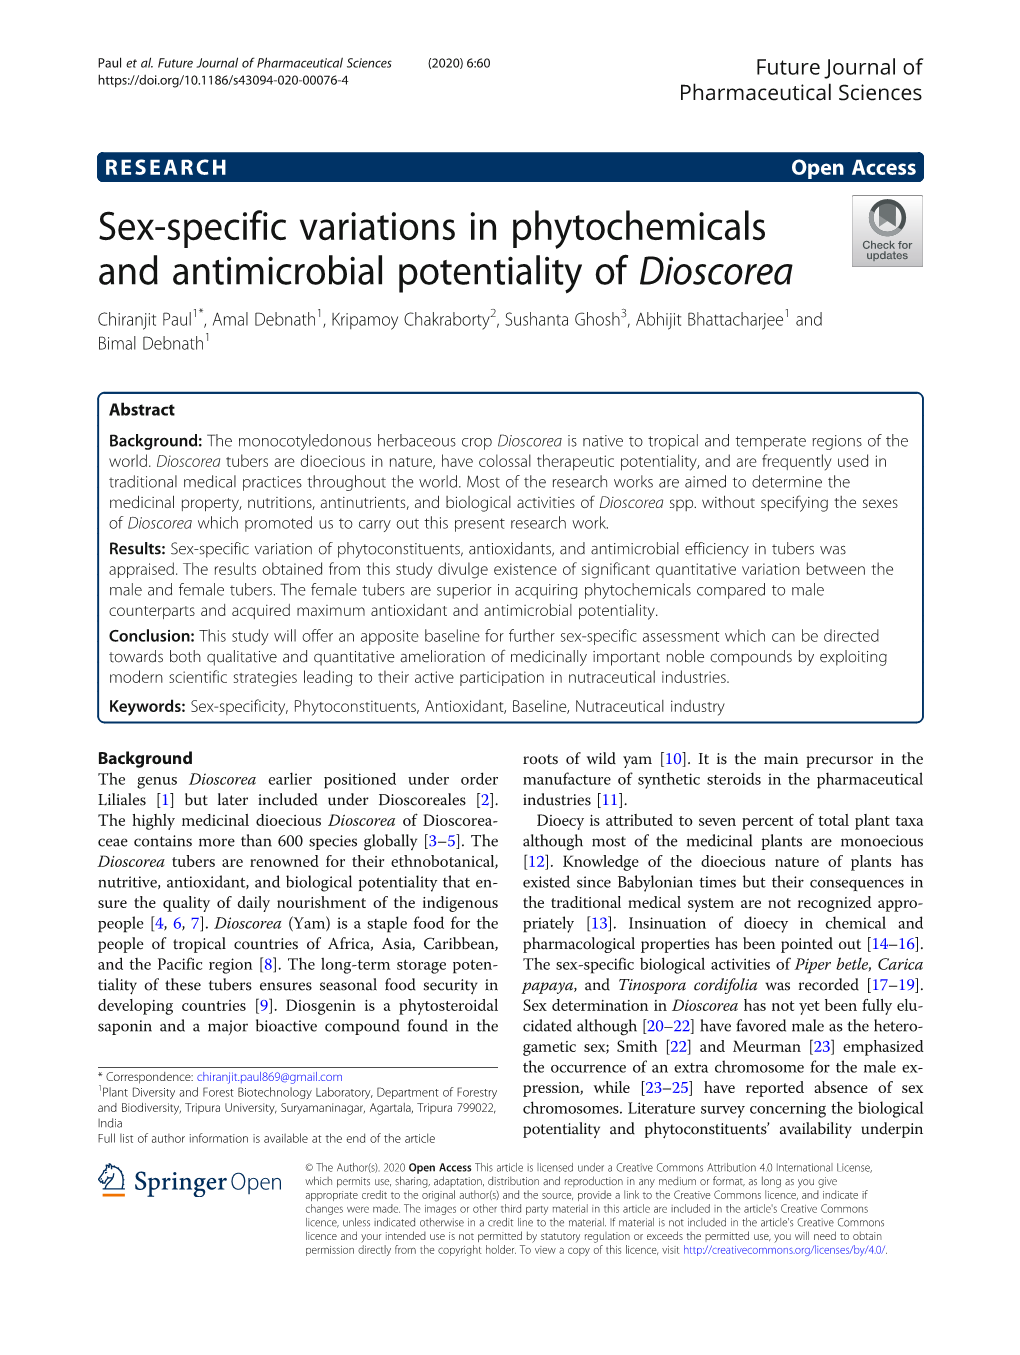 Sex-Specific Variations in Phytochemicals and Antimicrobial